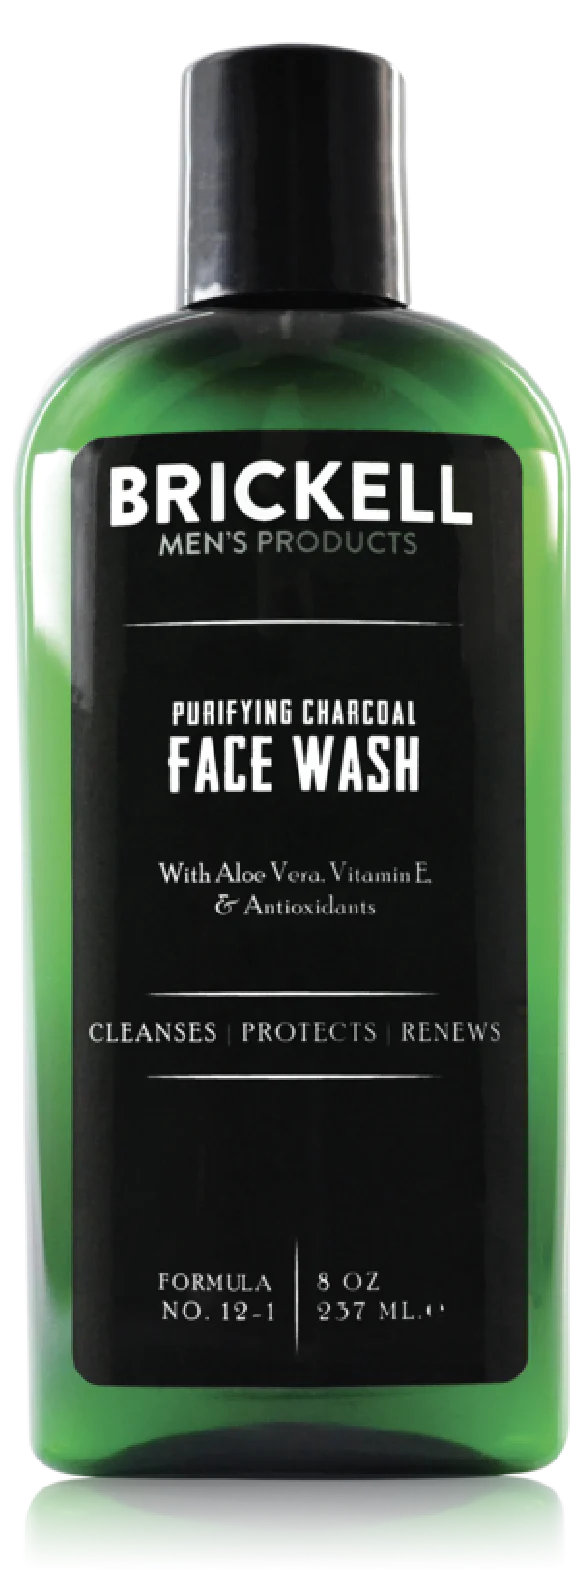 ACNE CONTROLLING CLEANSER